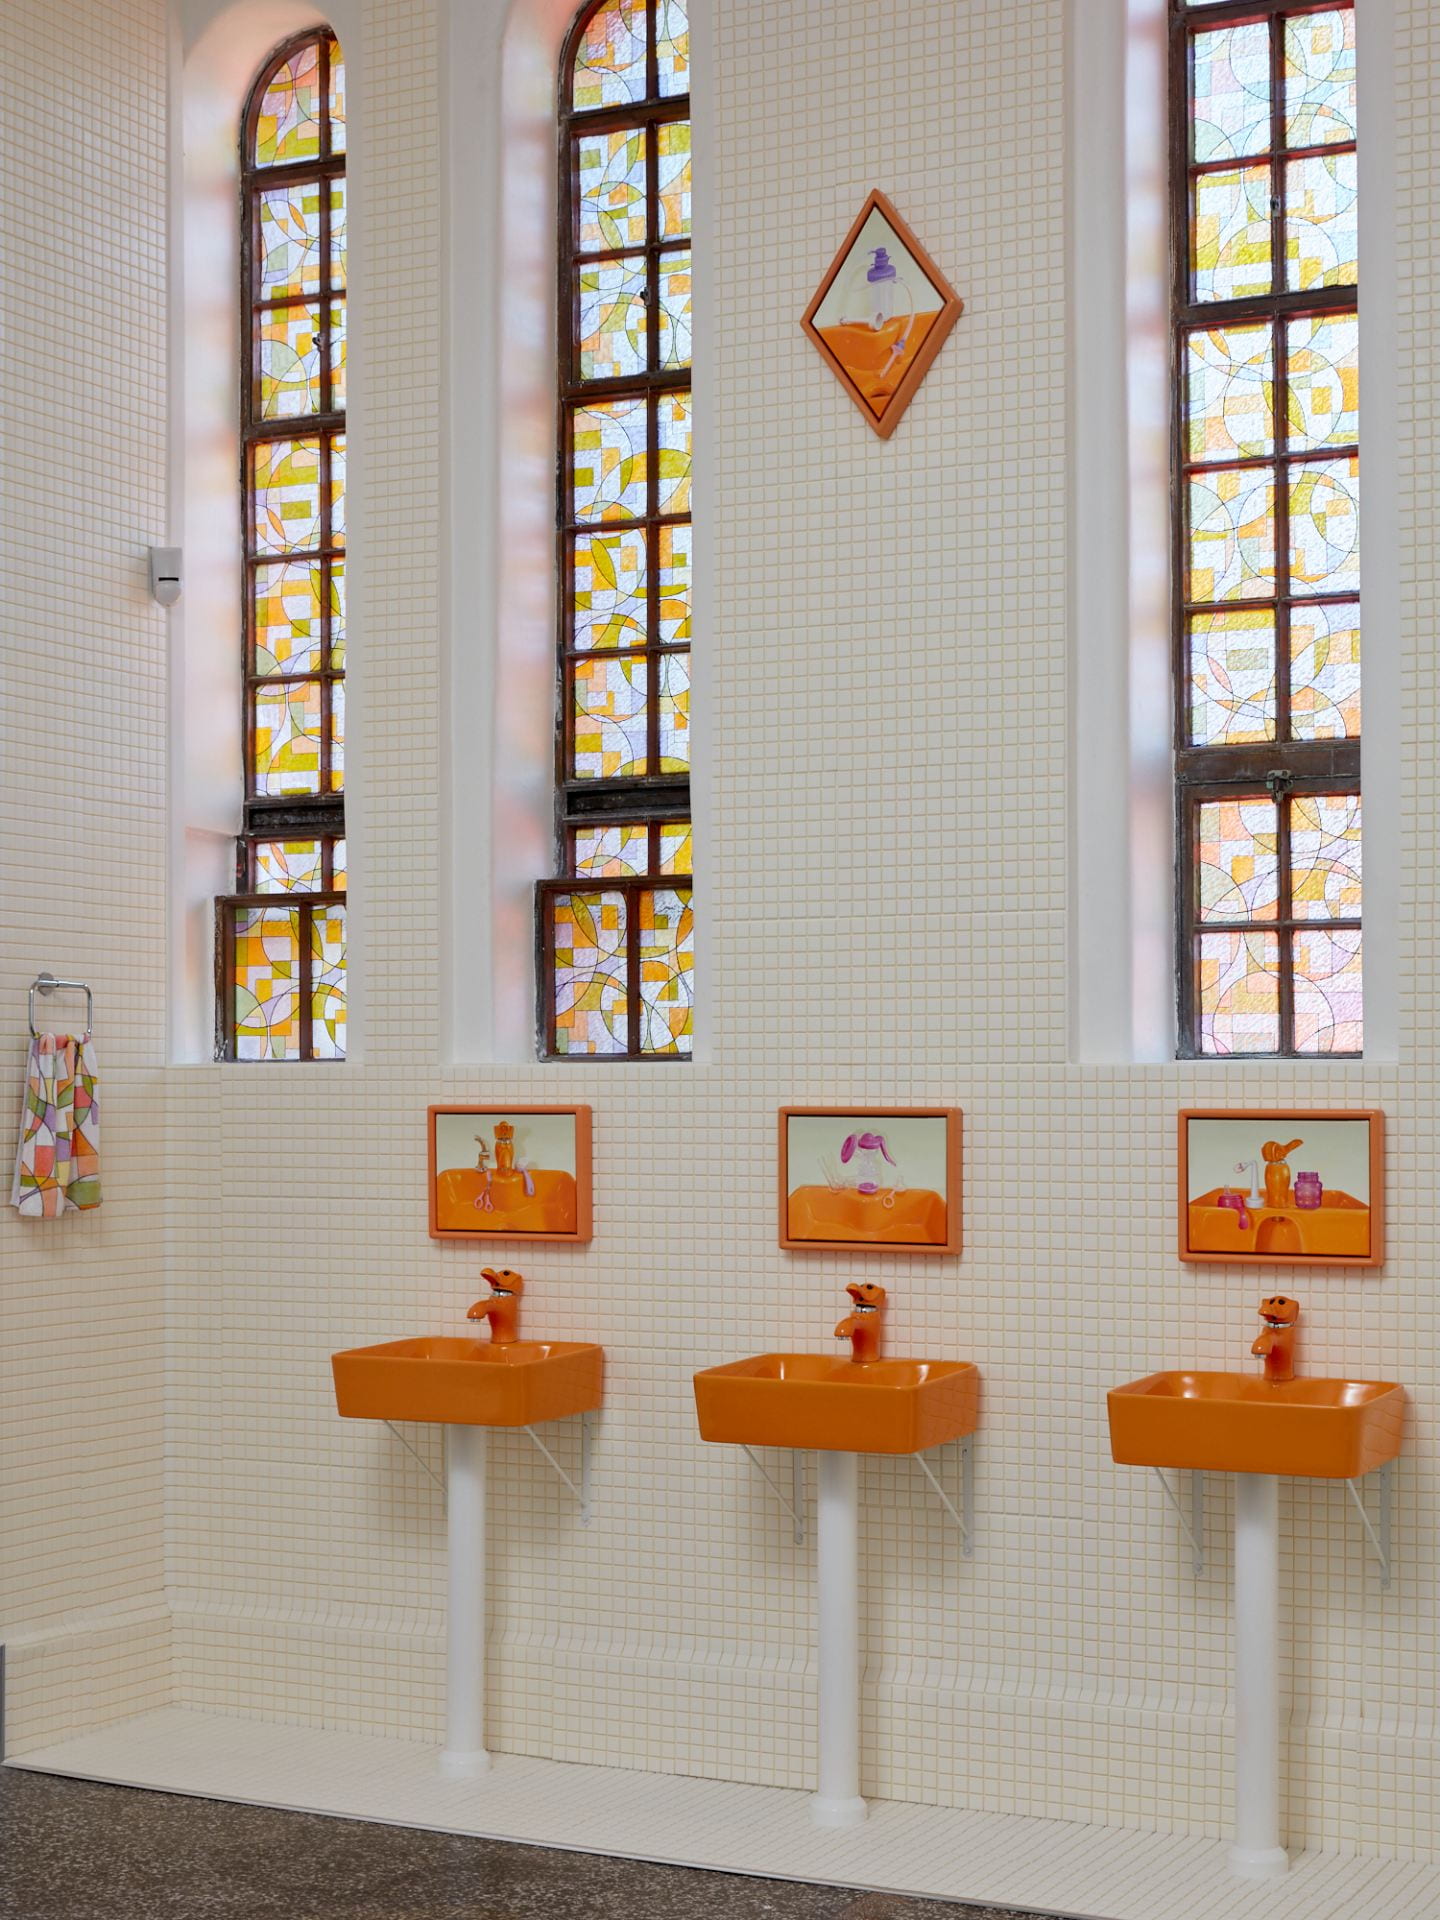 A gallery space covered in white tiles, with coloured vinyl applied over three tall windows and three orange sinks with elephant taps mounted to the wall. Above each sink is a painting of the same sinks.